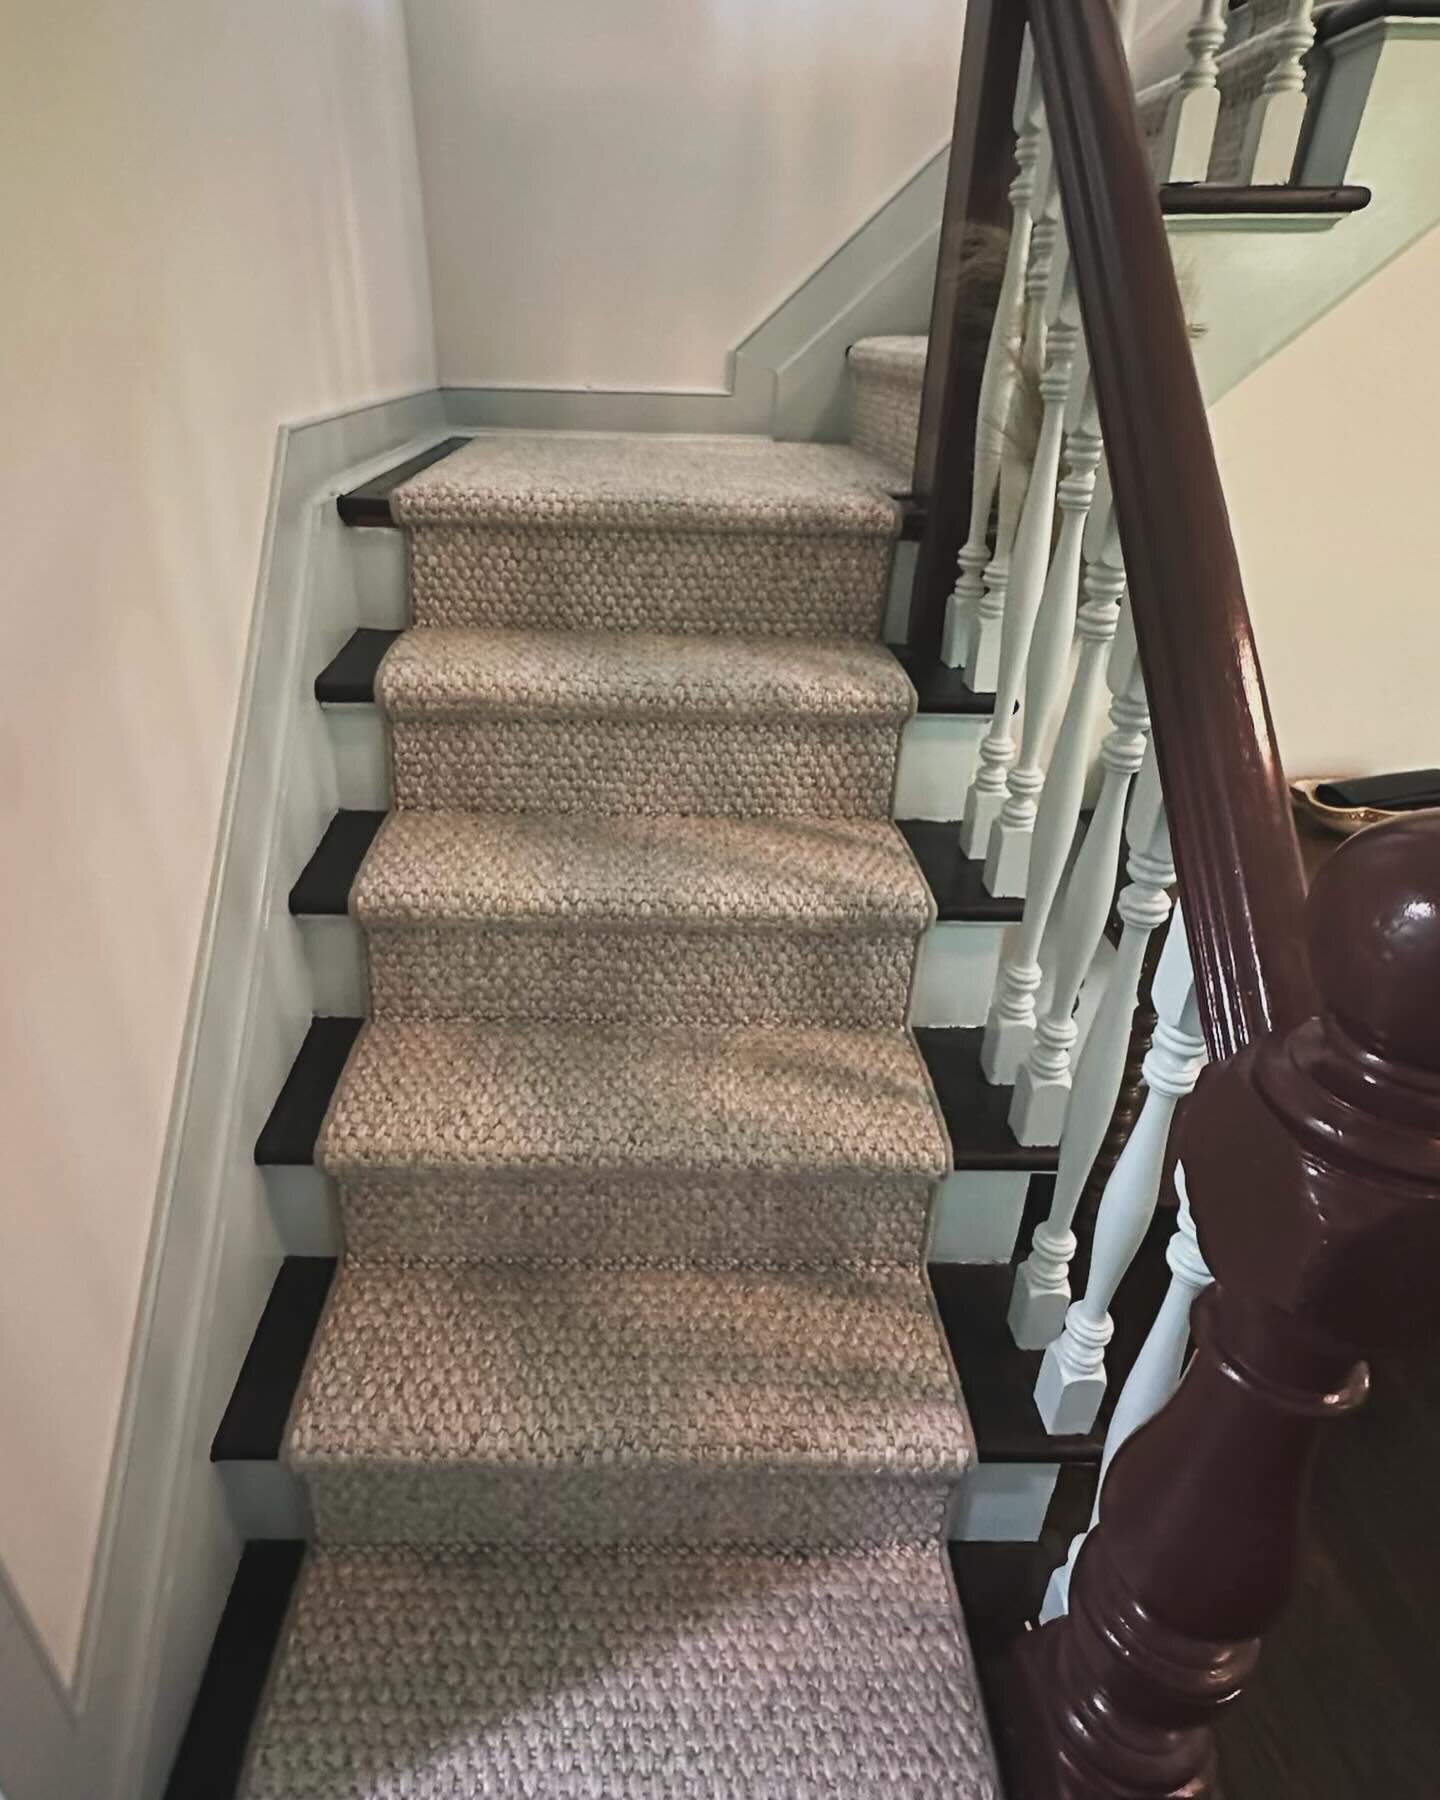 Always take the stairs👟👟

There&rsquo;s the obvious benefits - it&rsquo;s good for your cardiovascular health and helps you build muscle strength.🫀💪🏼

Then there&rsquo;s the not so obvious. Stairs are a smaller consideration in home renovations,